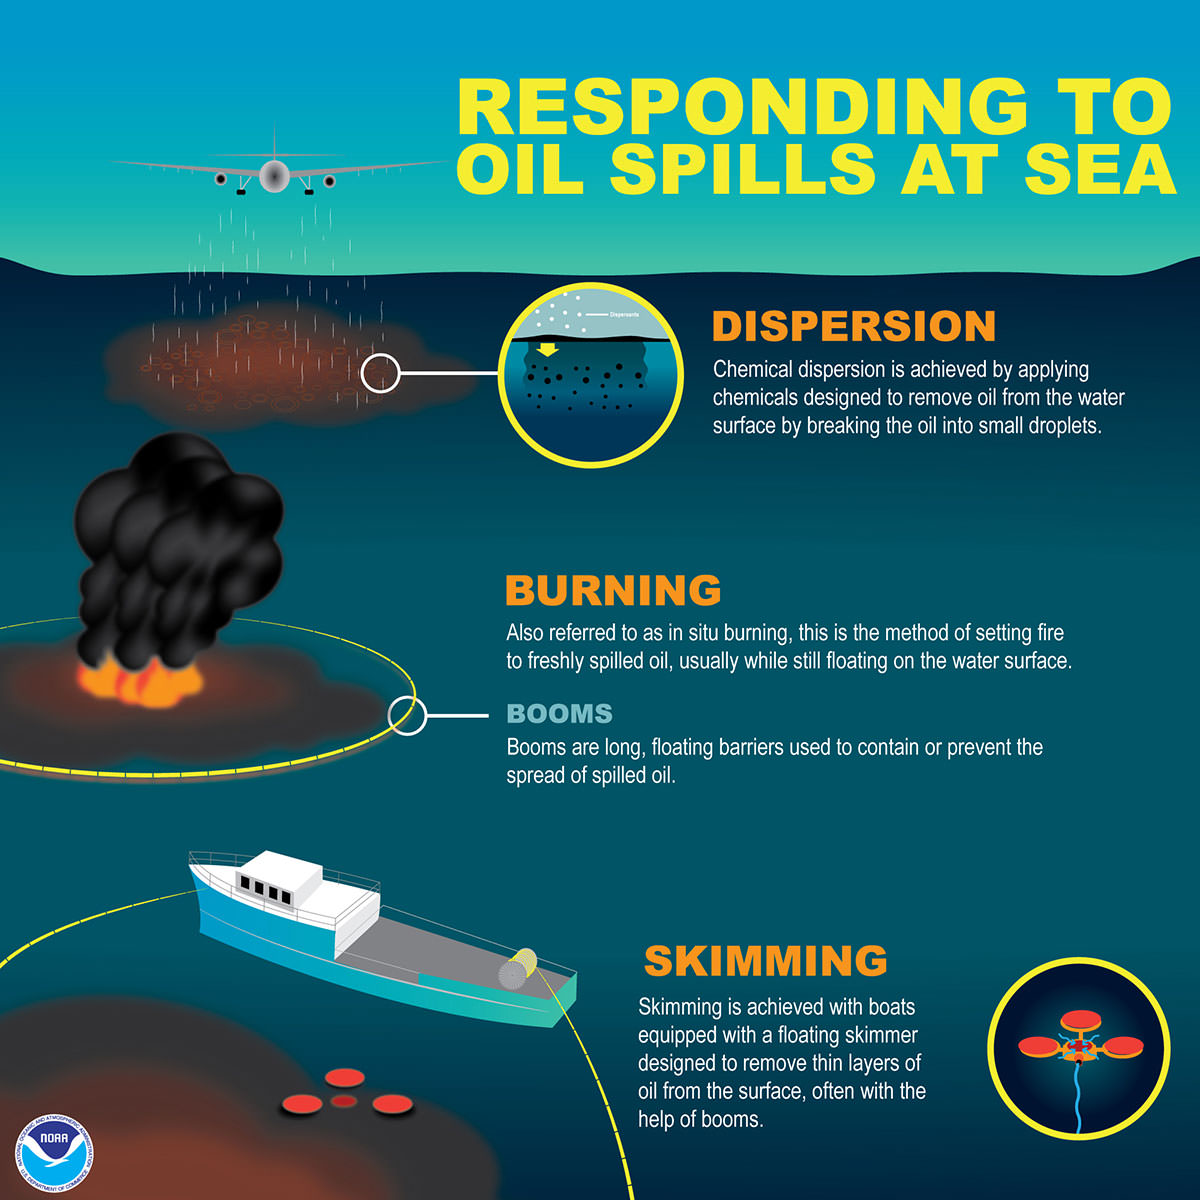 How does NOAA help clean up oil and chemical spills?